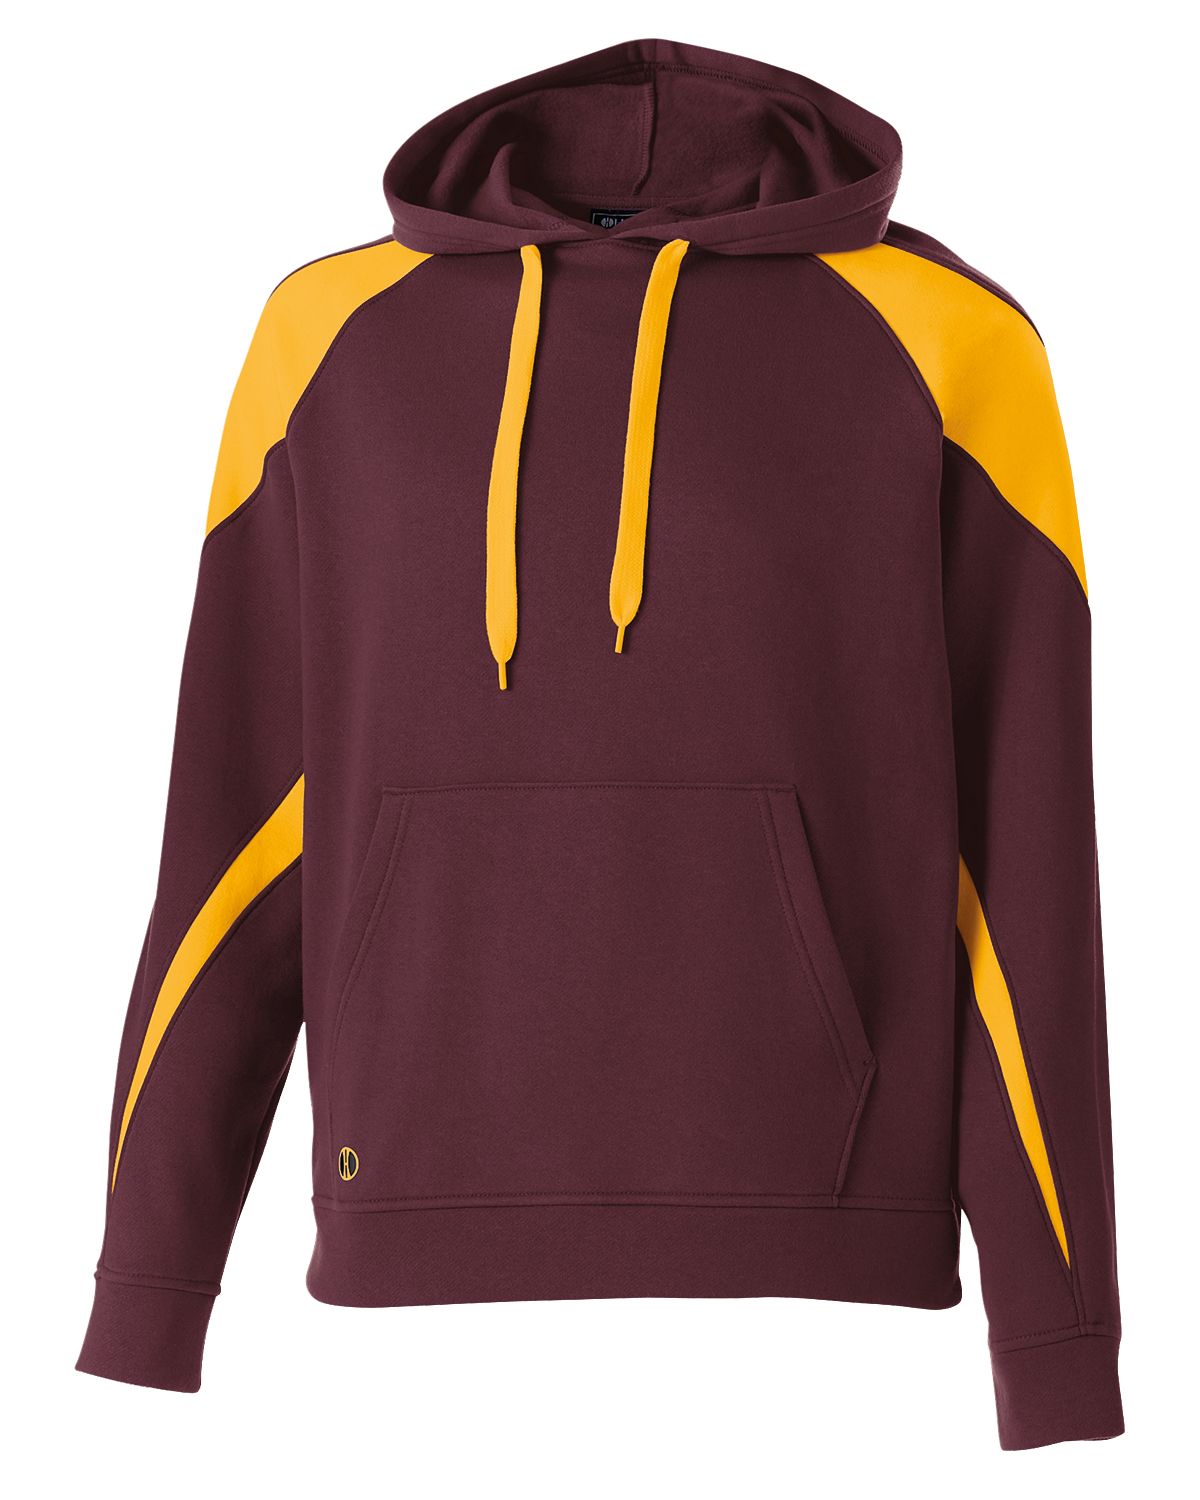 click to view Maroon/Light Gold